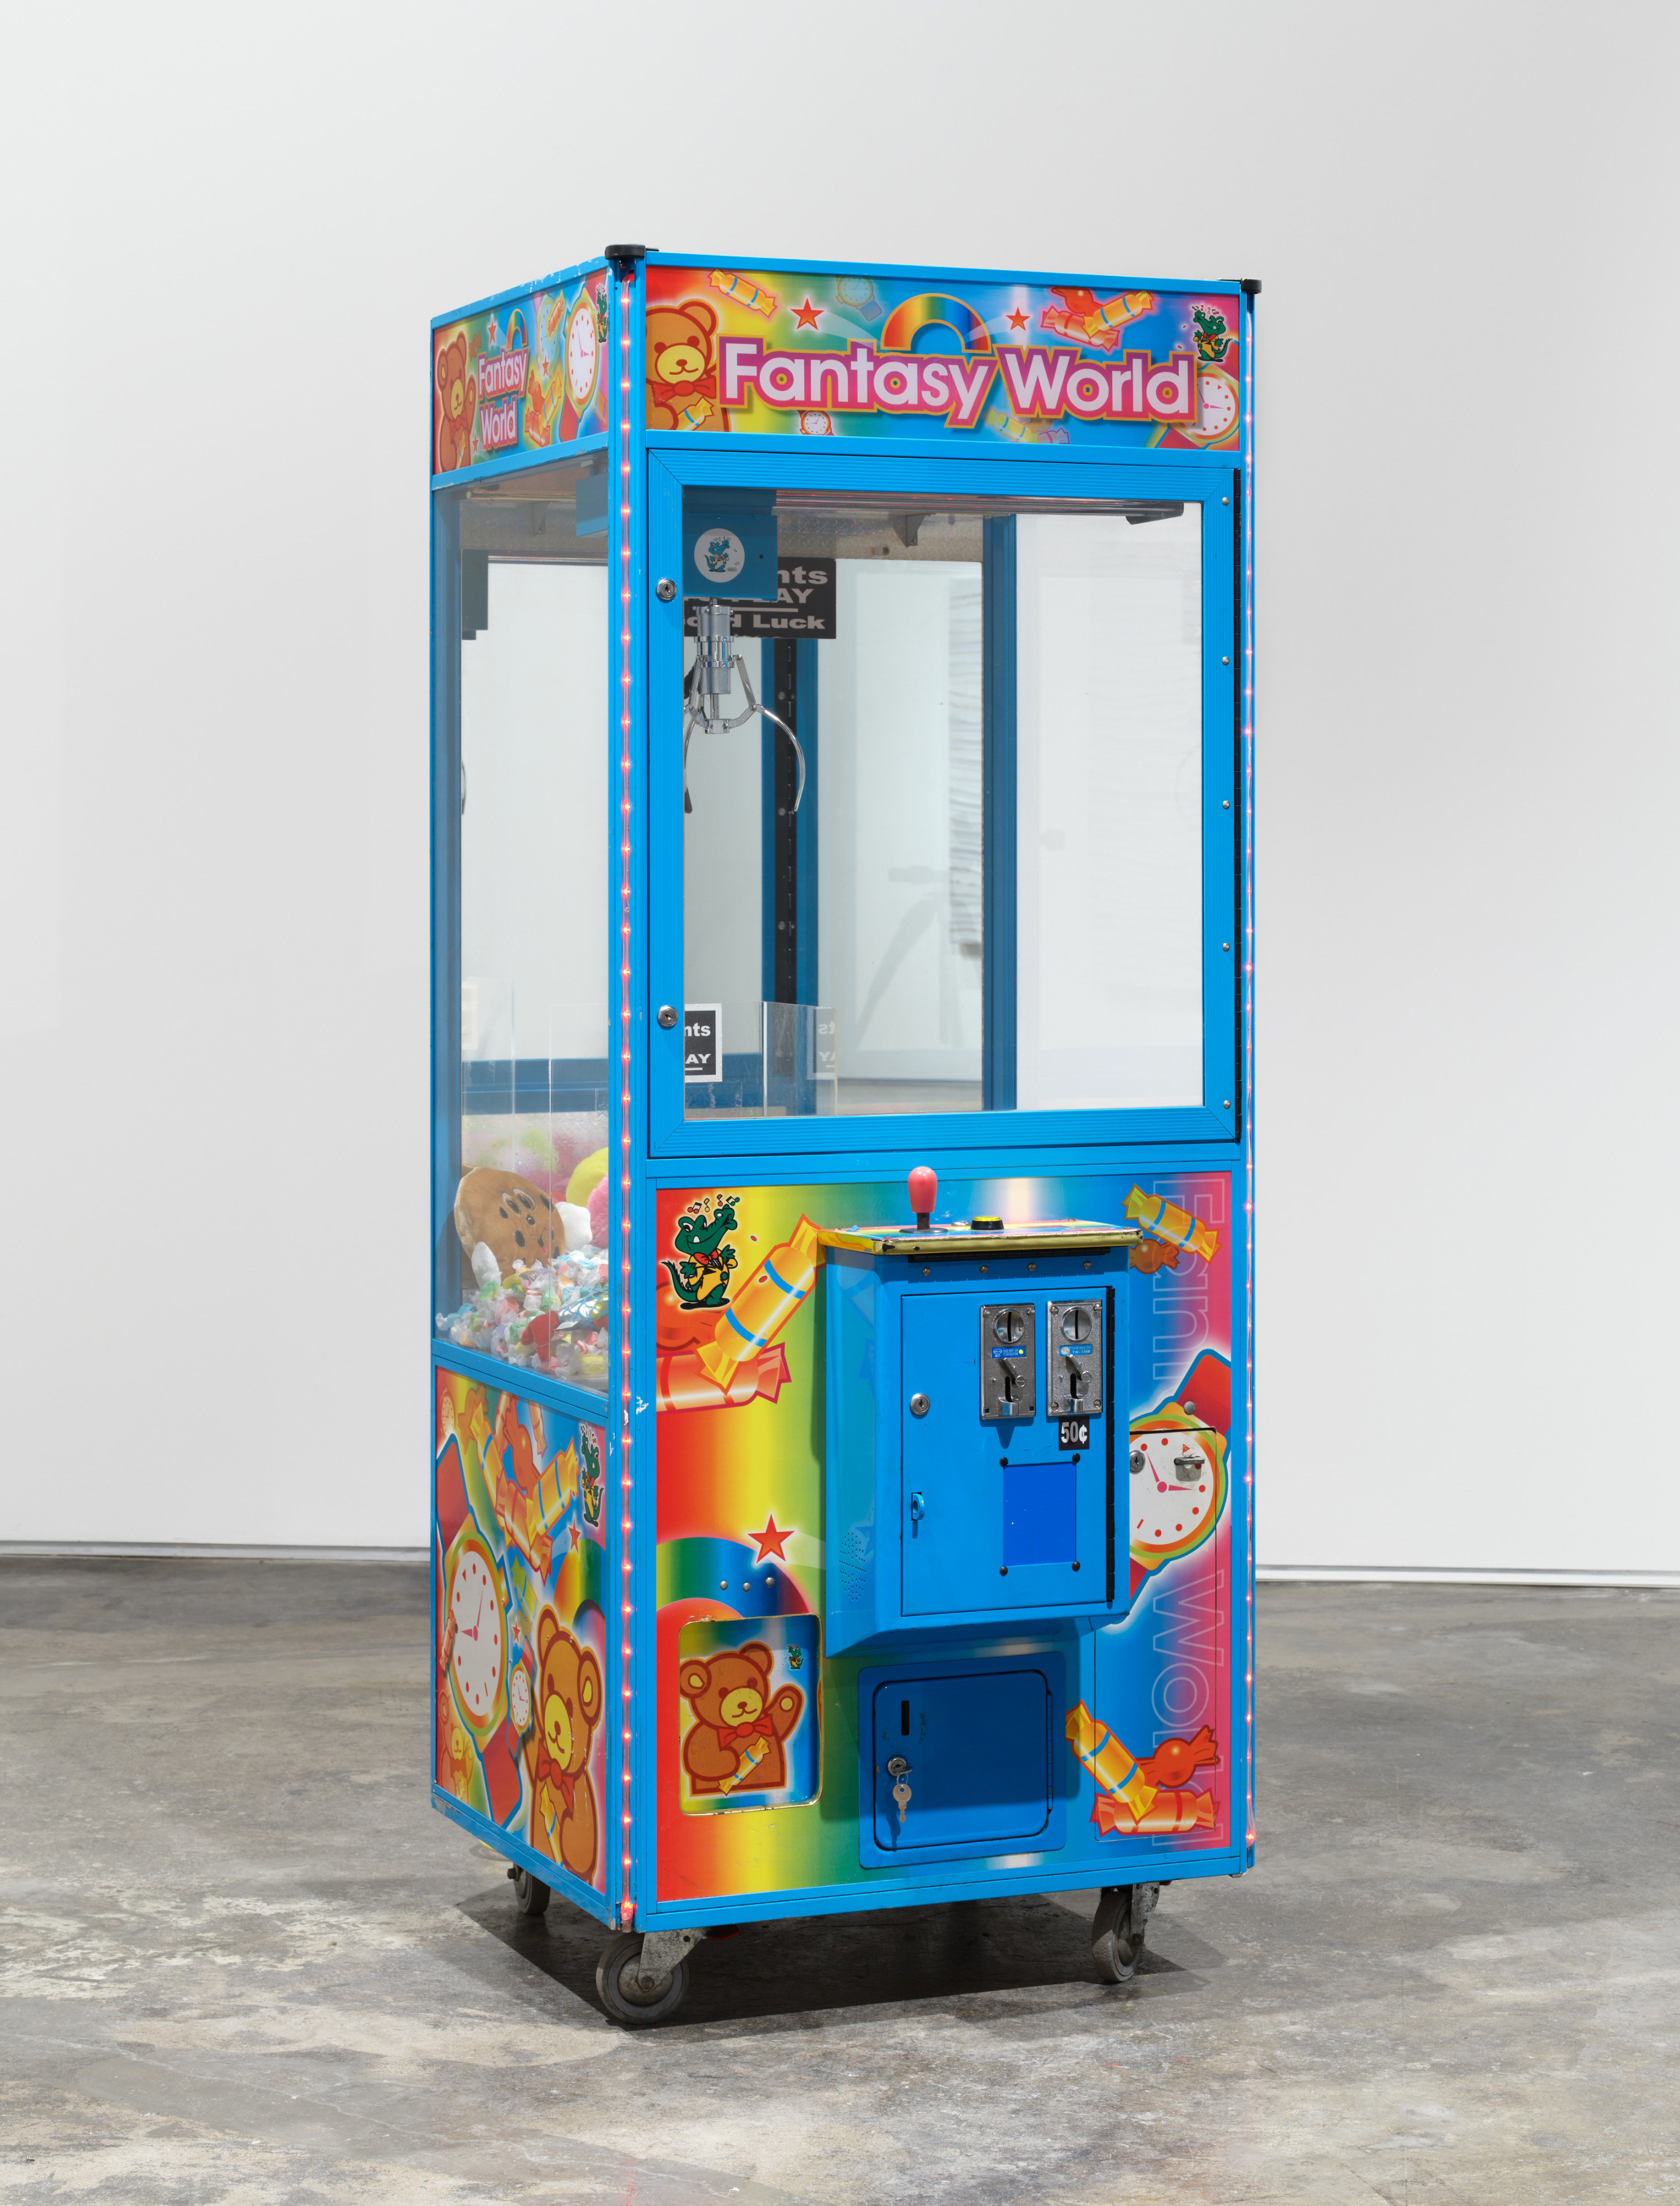 Anthony Olubunmi Akinbola artwork titled "Fantasy World". Blue carnival machine filled with saltwater taffy, rolls of cash and other toys. 75 3/4 x 31 x 34 1/4 in (192.4 x 78.7 x 87 cm), claw machine, various toys, and candy, 2023.